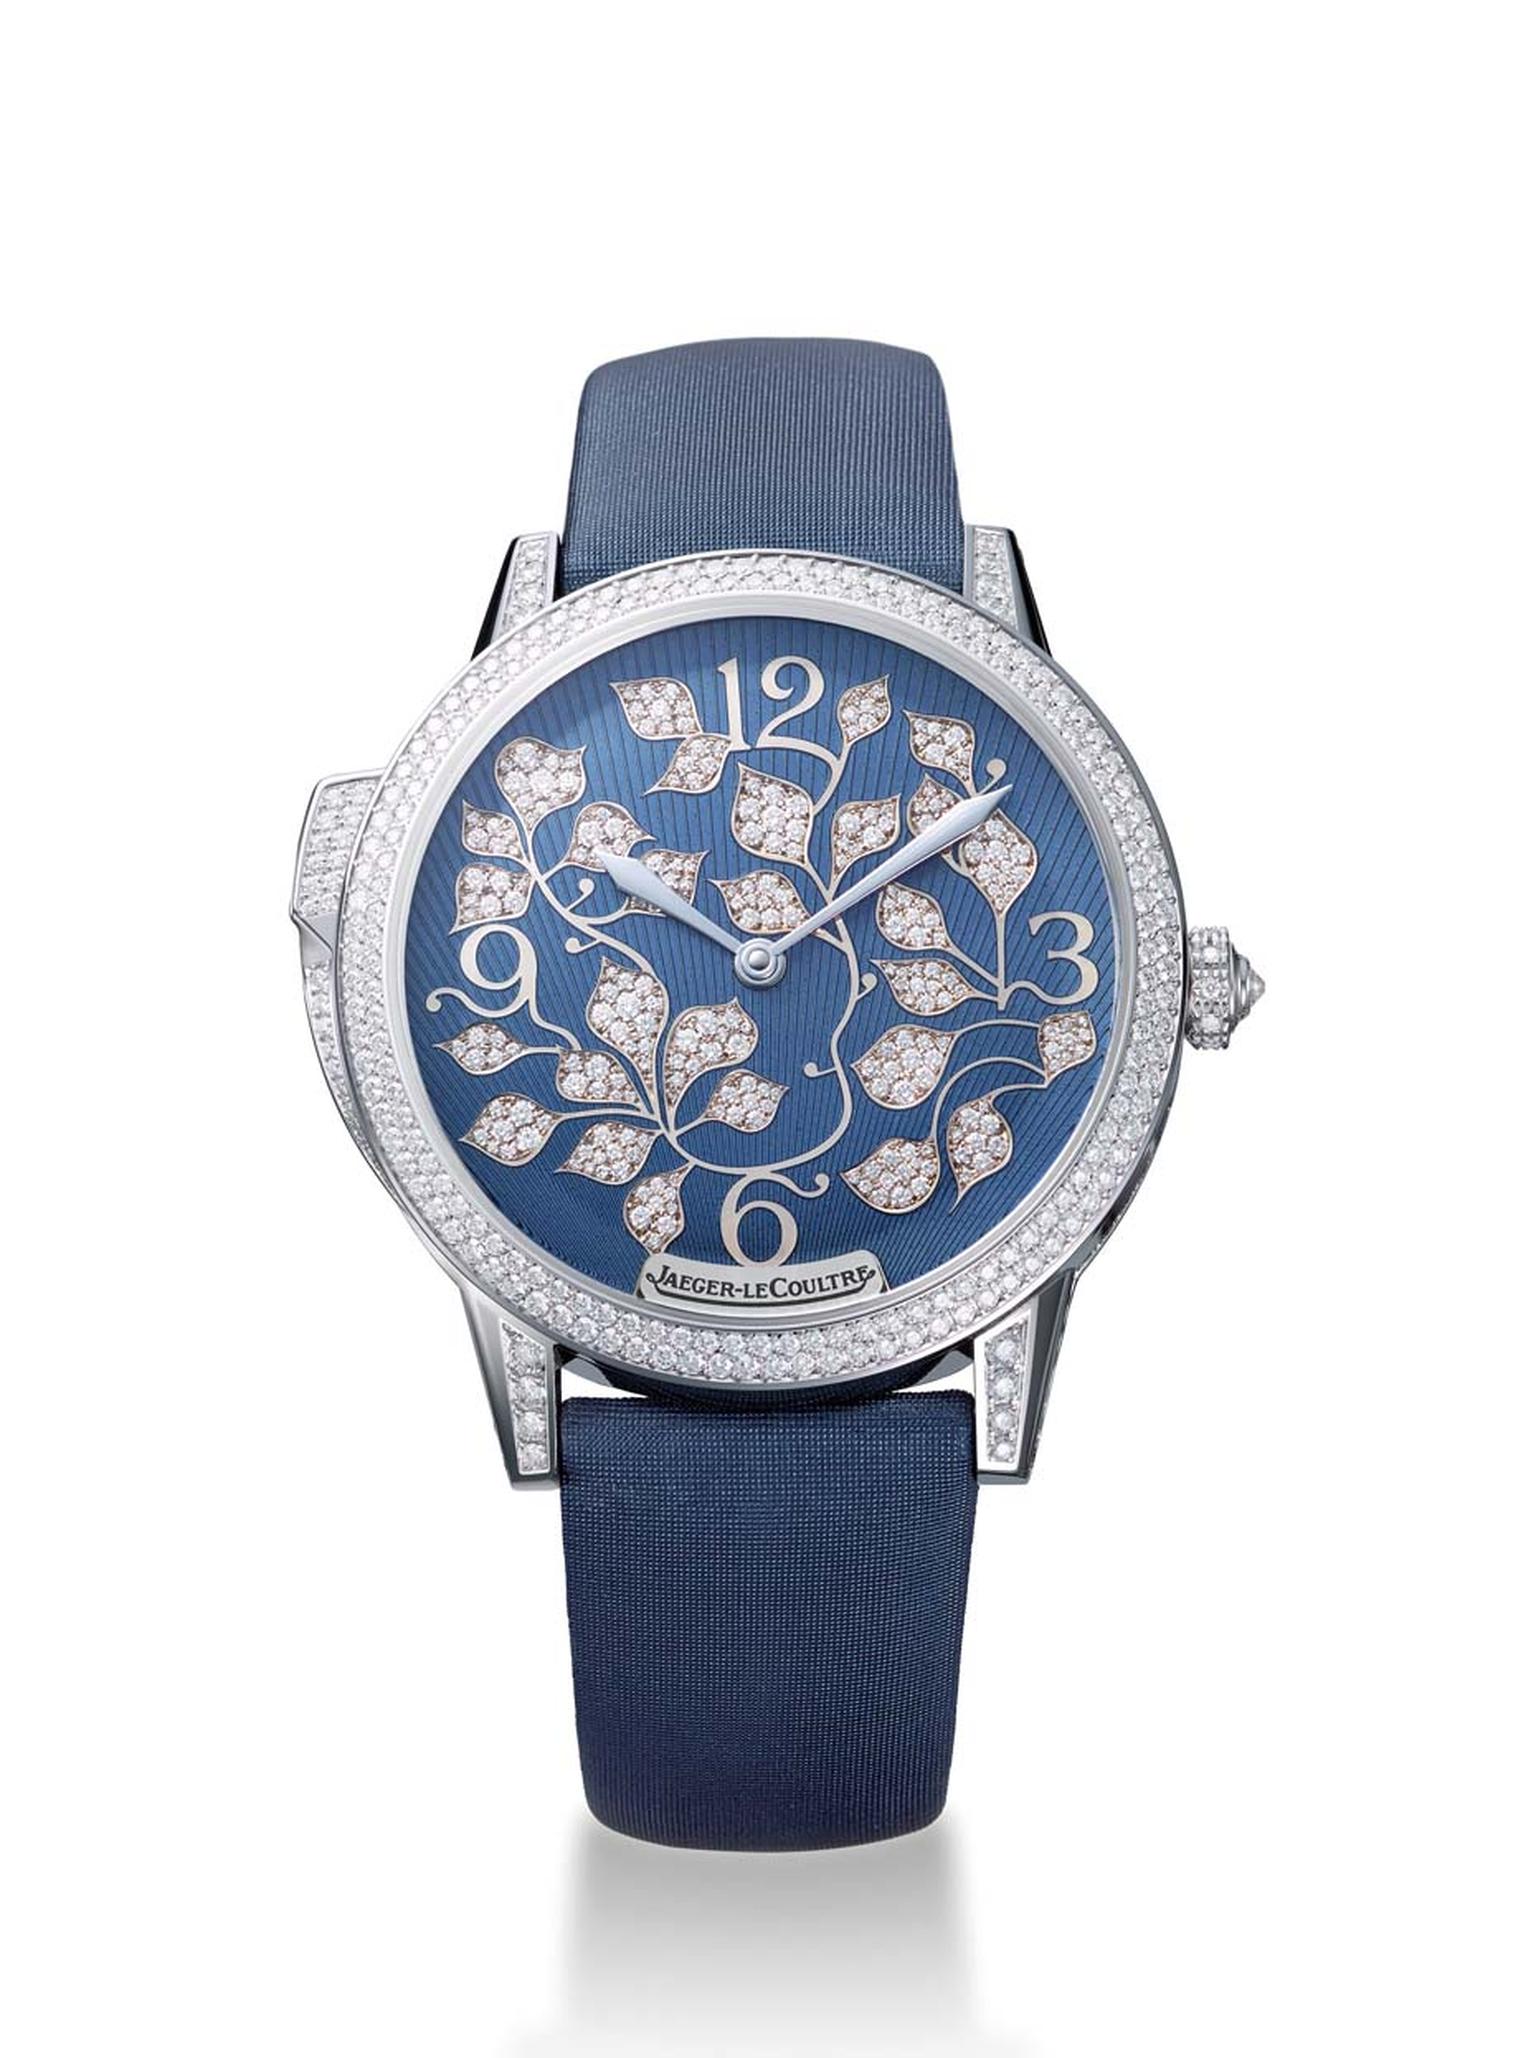 Jaeger-LeCoultre's new Rendez-Vous Ivy Minute Repeater watch is the first minute repeater designed exclusively for women by the Swiss watchmaker.